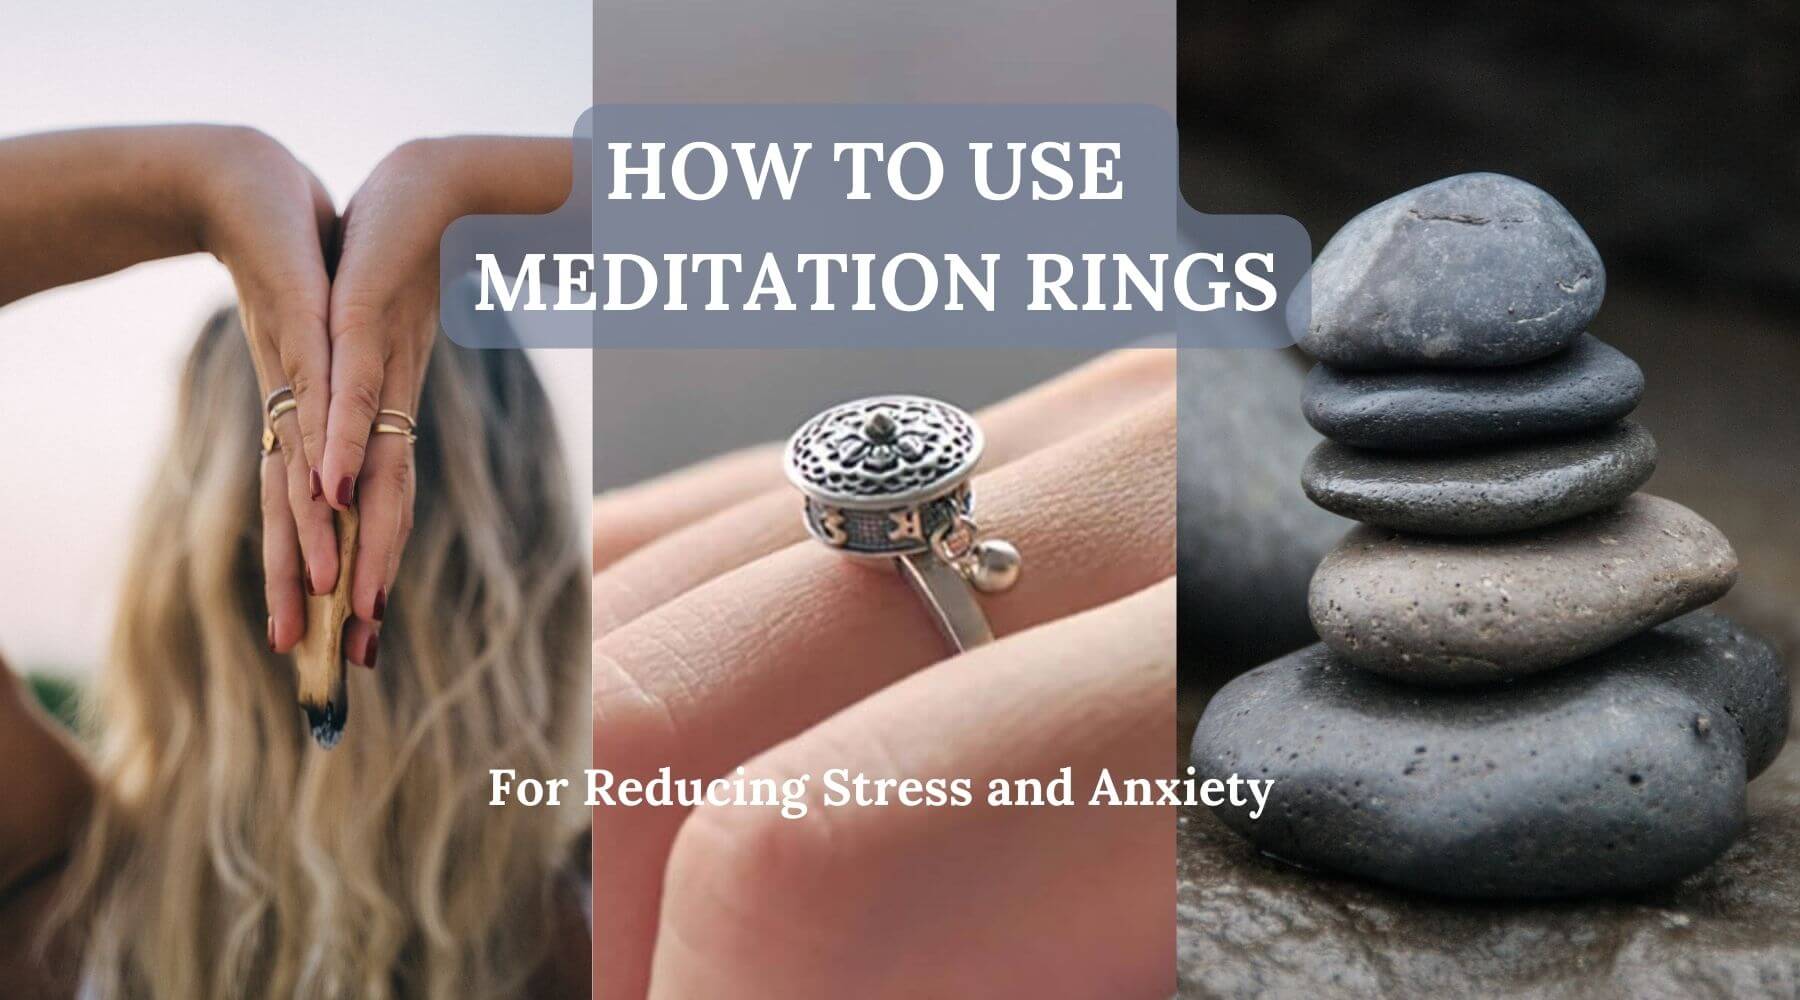 How to use meditation rings for reducing stress and anxiety